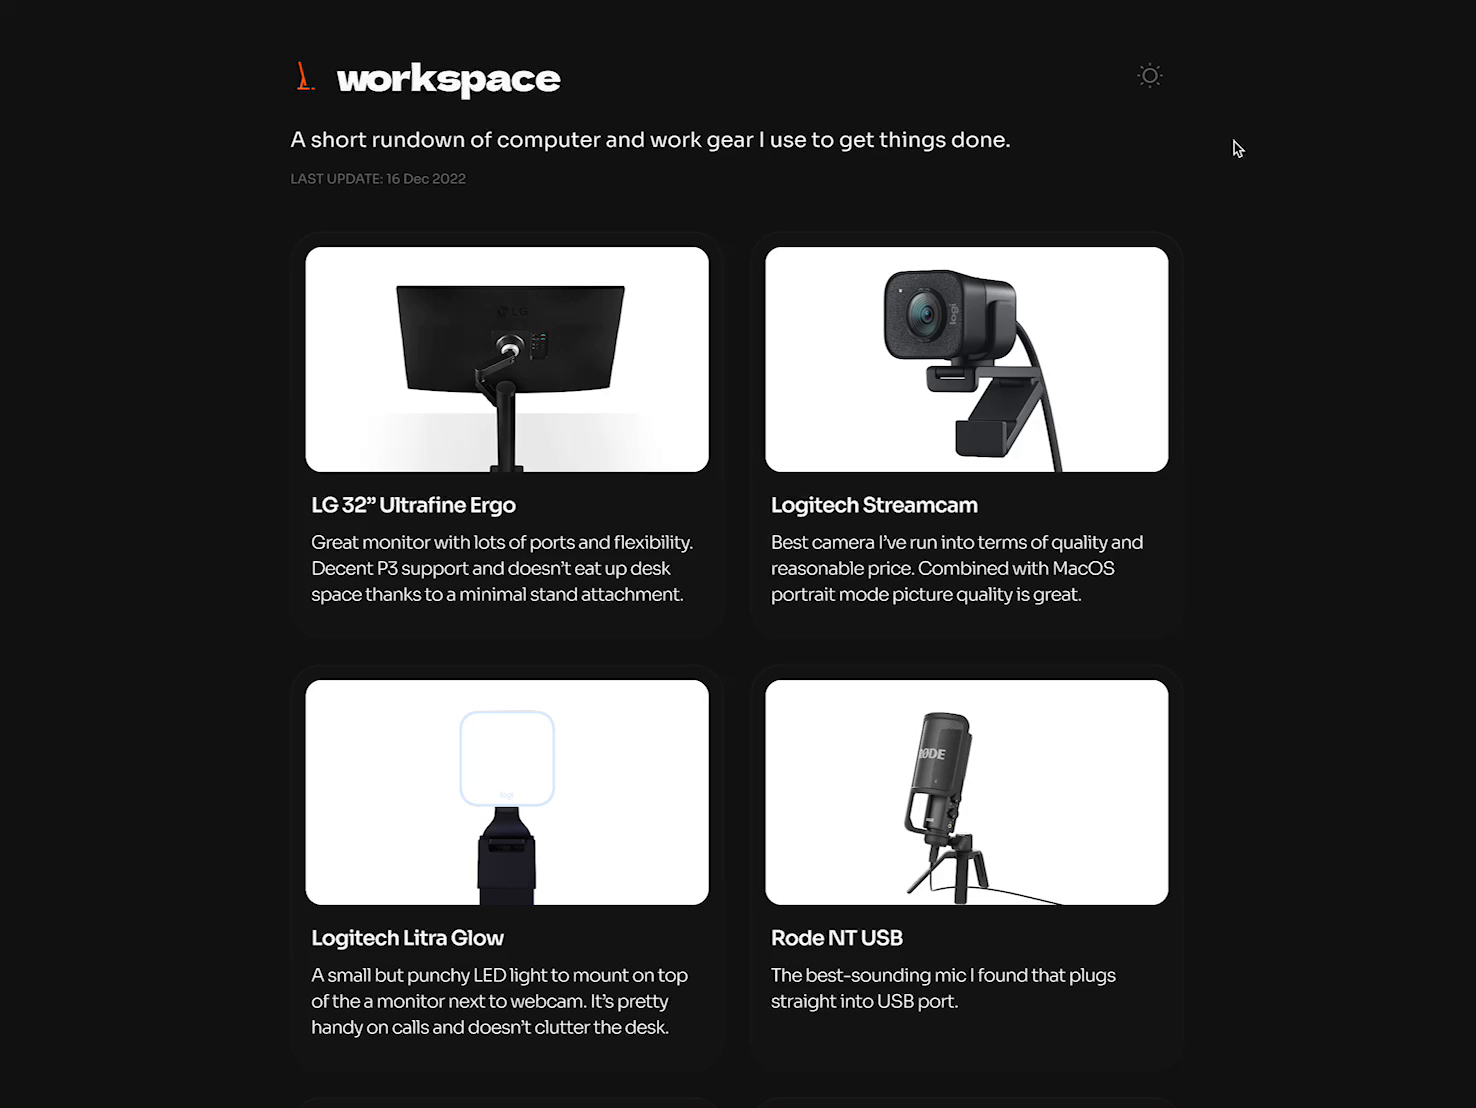 Personal Site Page - Light / Dark Mode by usrnk1 on Dribbble